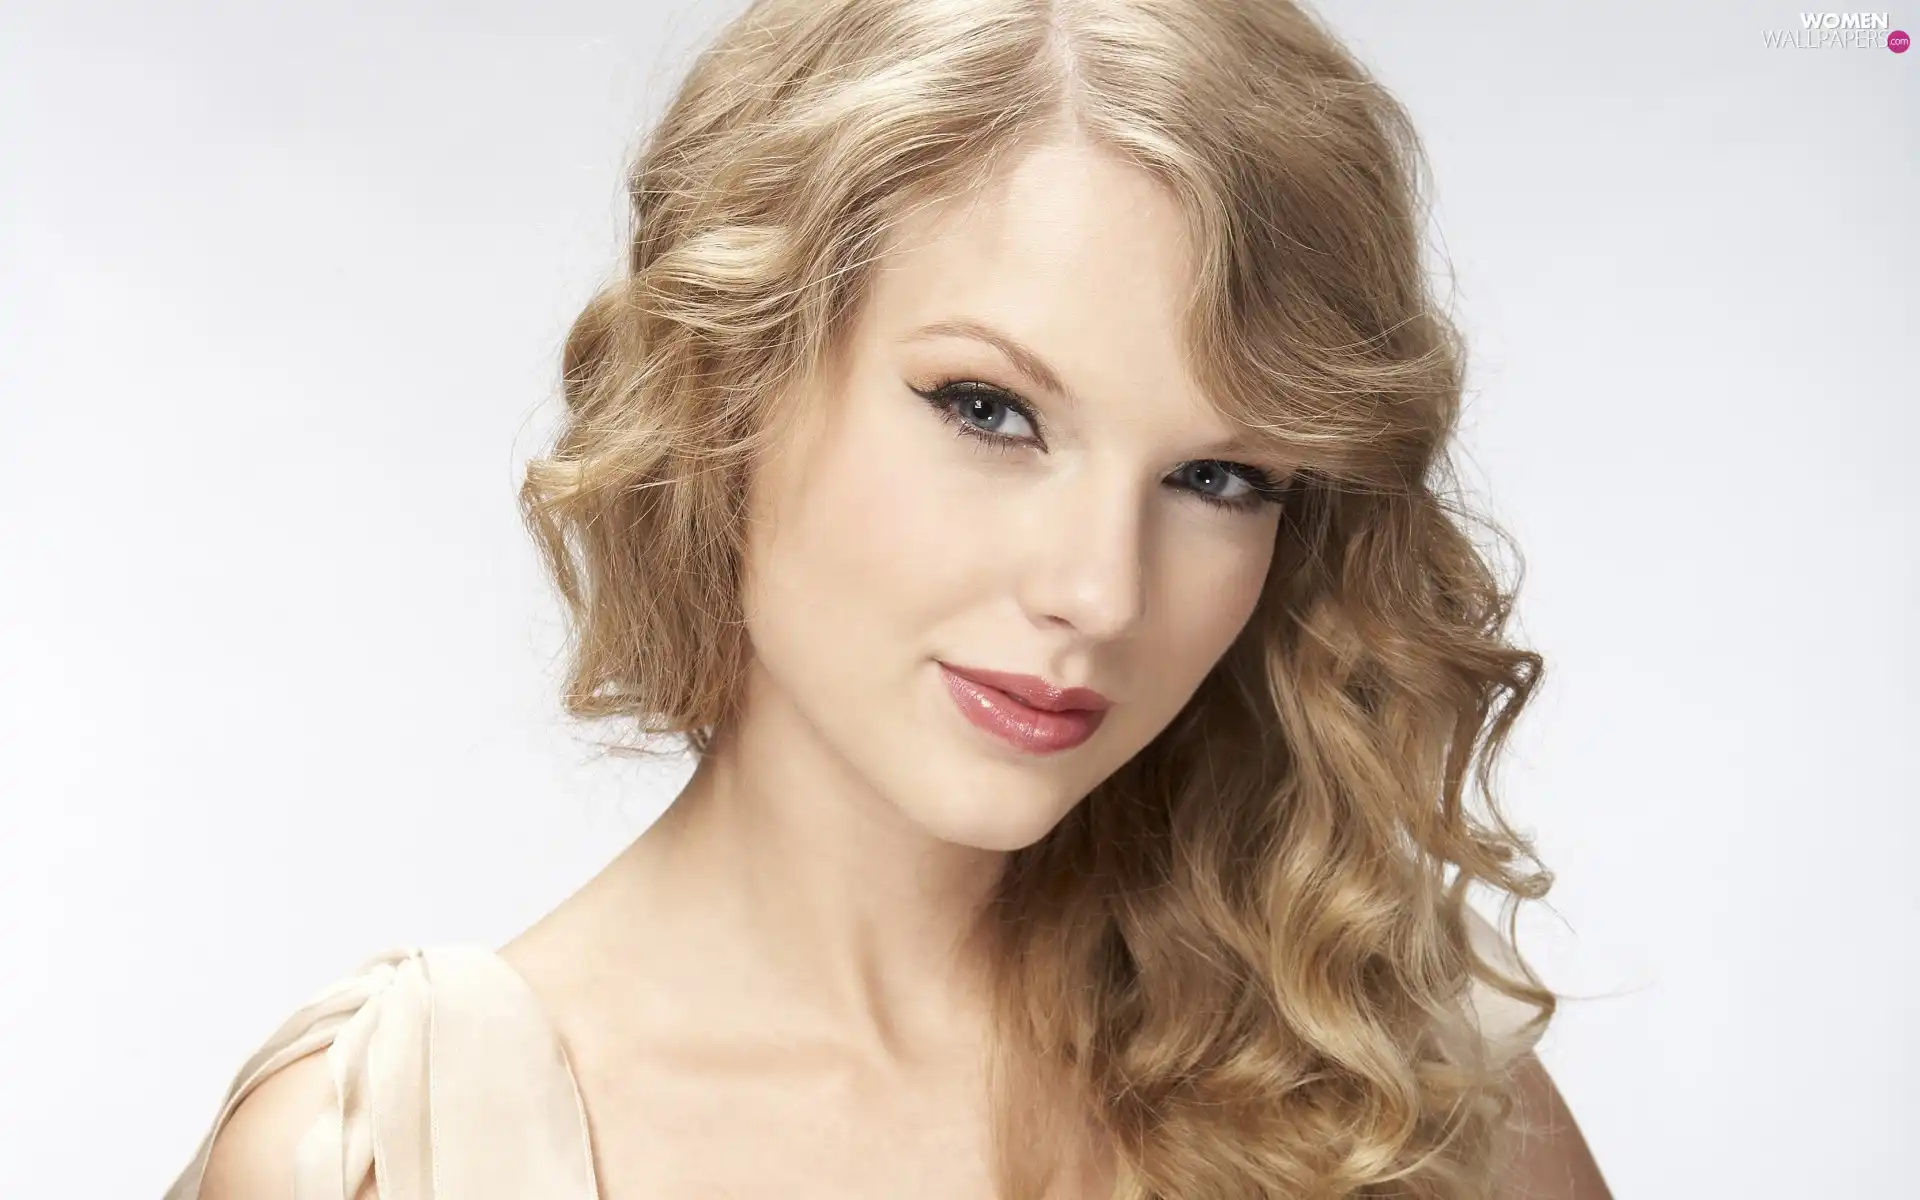 Smile, Taylor Swift, face